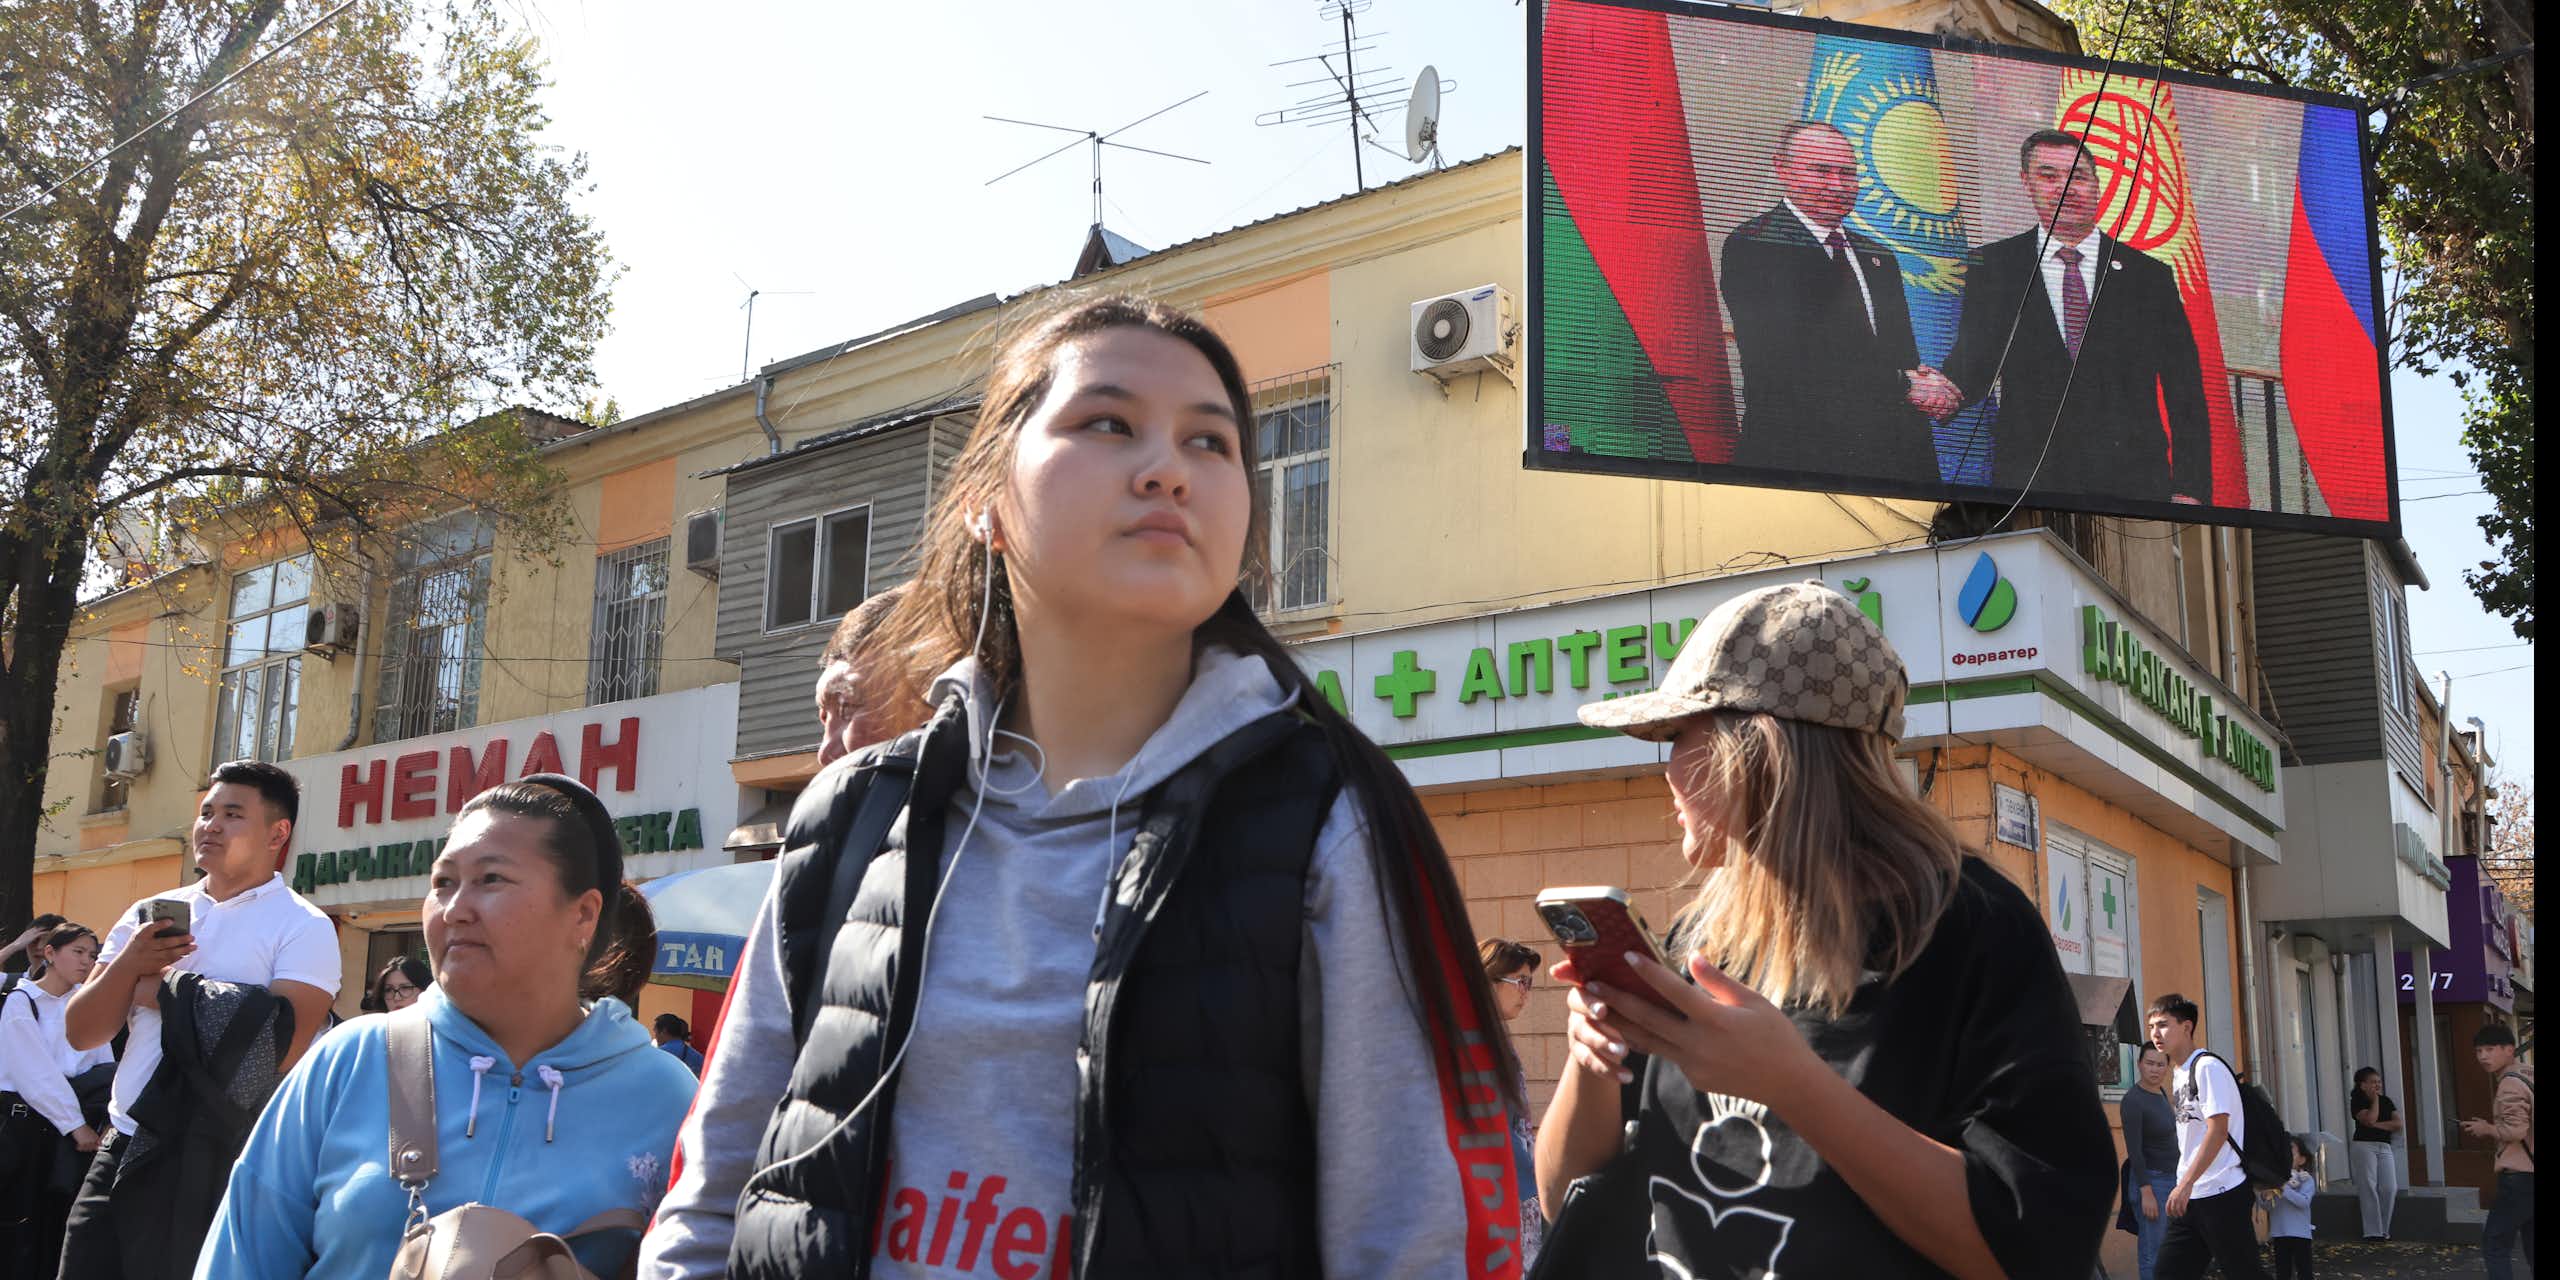 Women stand in a group in front of shops and a big TV screen showing two men.